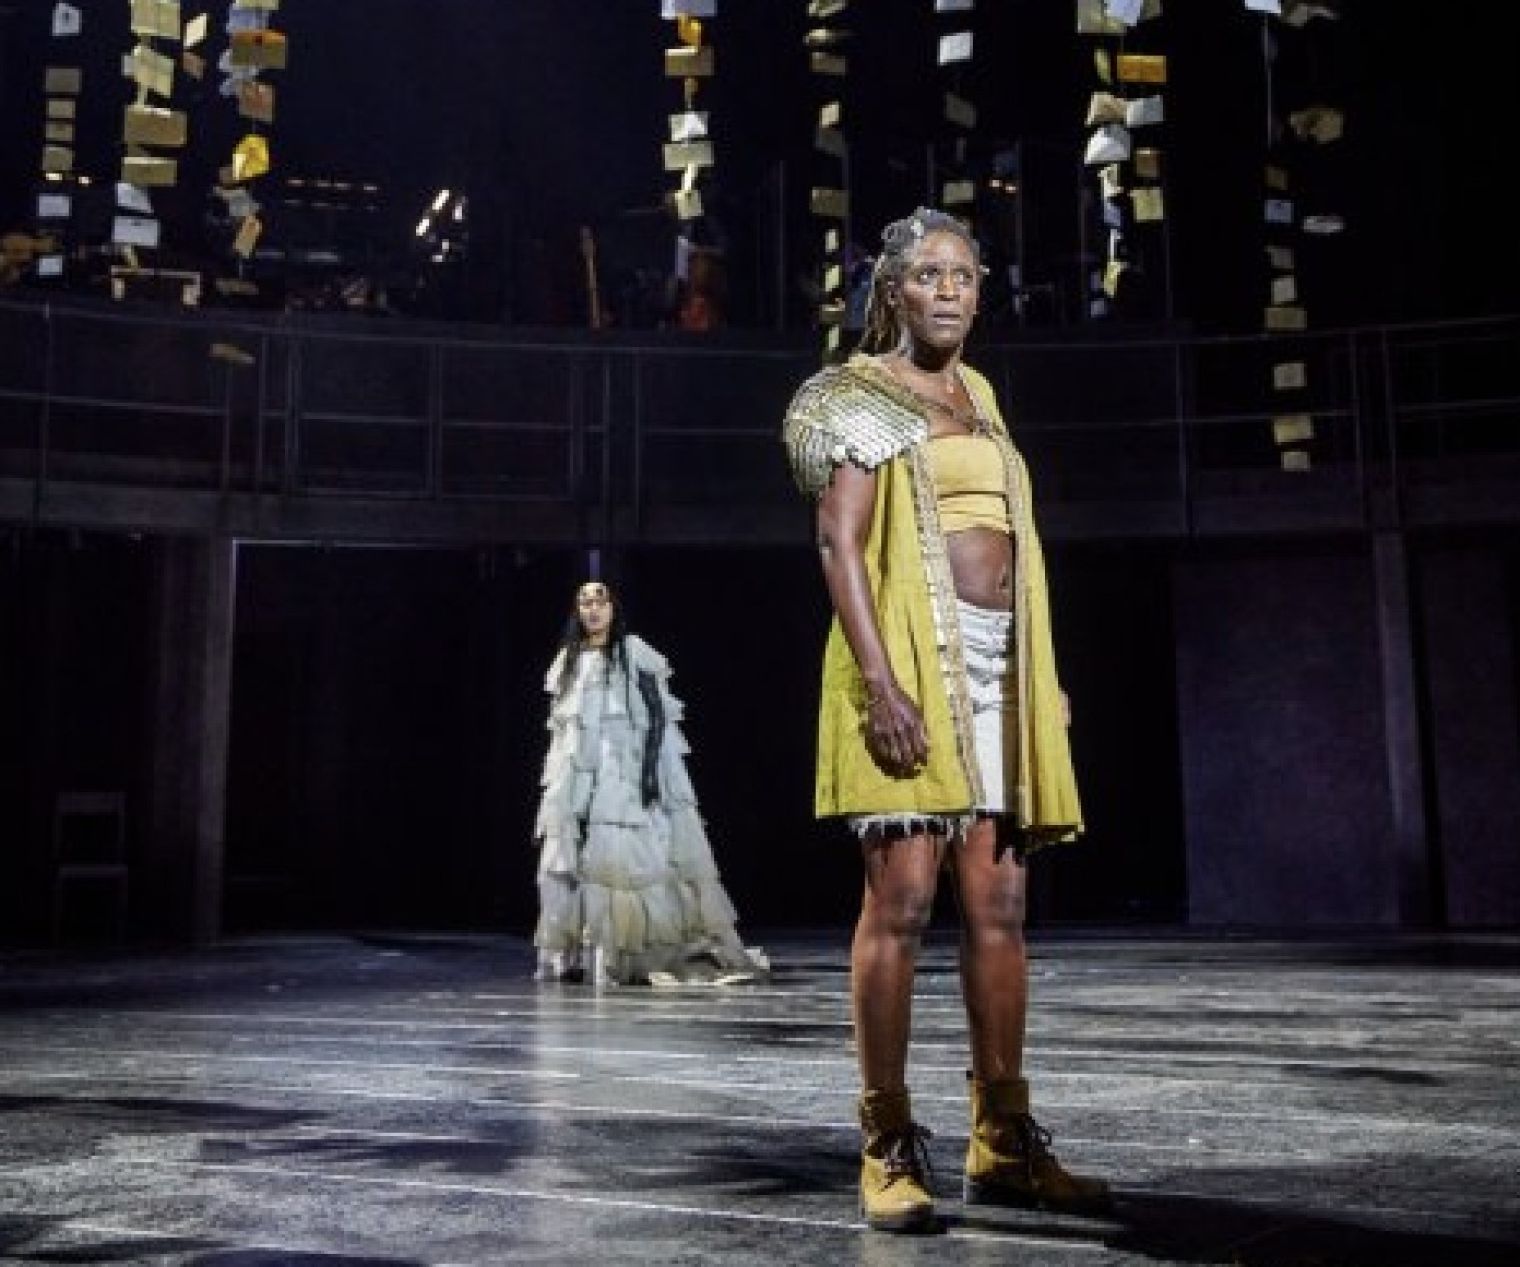 Sharon Duncan-Brewster stars as Odysseus in The Odyssey at the National Theatre this weekend